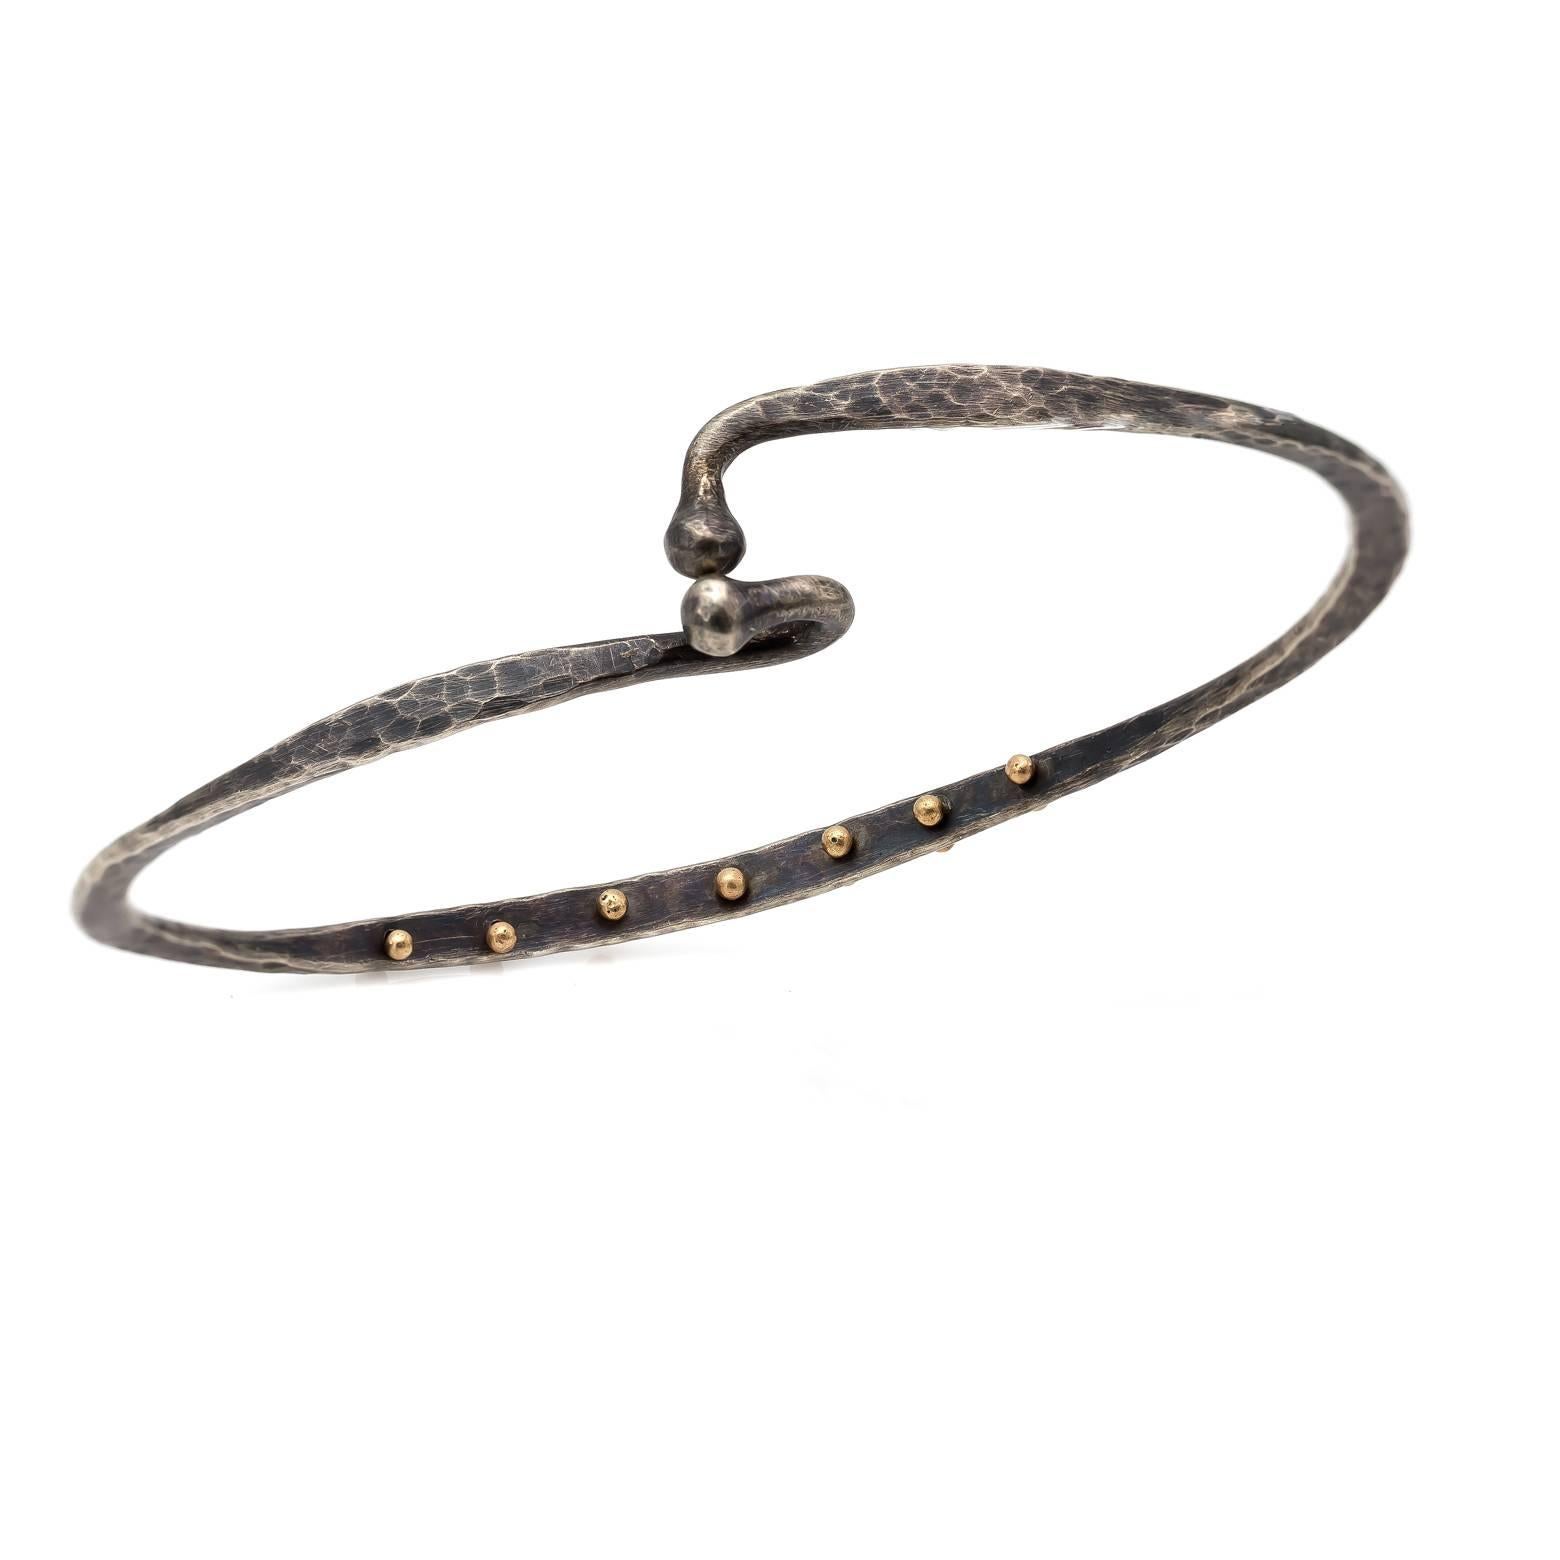 Artistic and chic this hammered cuff/bangle is adorned with 14K yellow gold studs that add a unique flare. The twisted and tapered design interconnects to hook together. A beautiful shade of grey. The bracelet opening measures 8